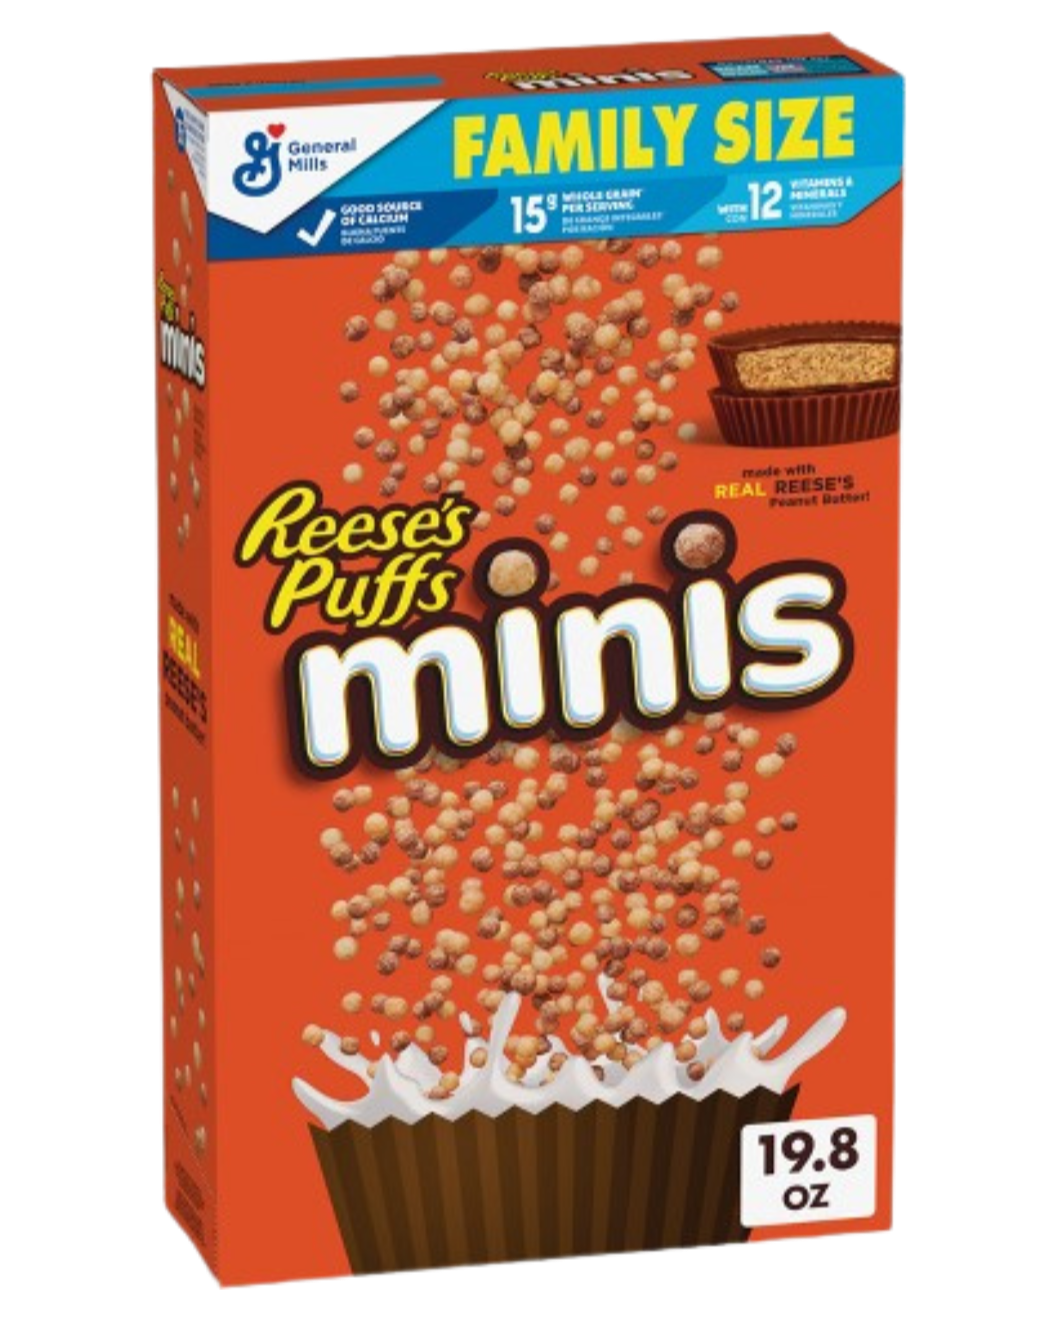 Reese's Puffs Minis Breakfast Cereal, Chocolate Peanut Butter Cereal, Family Size, 19.8 OZ